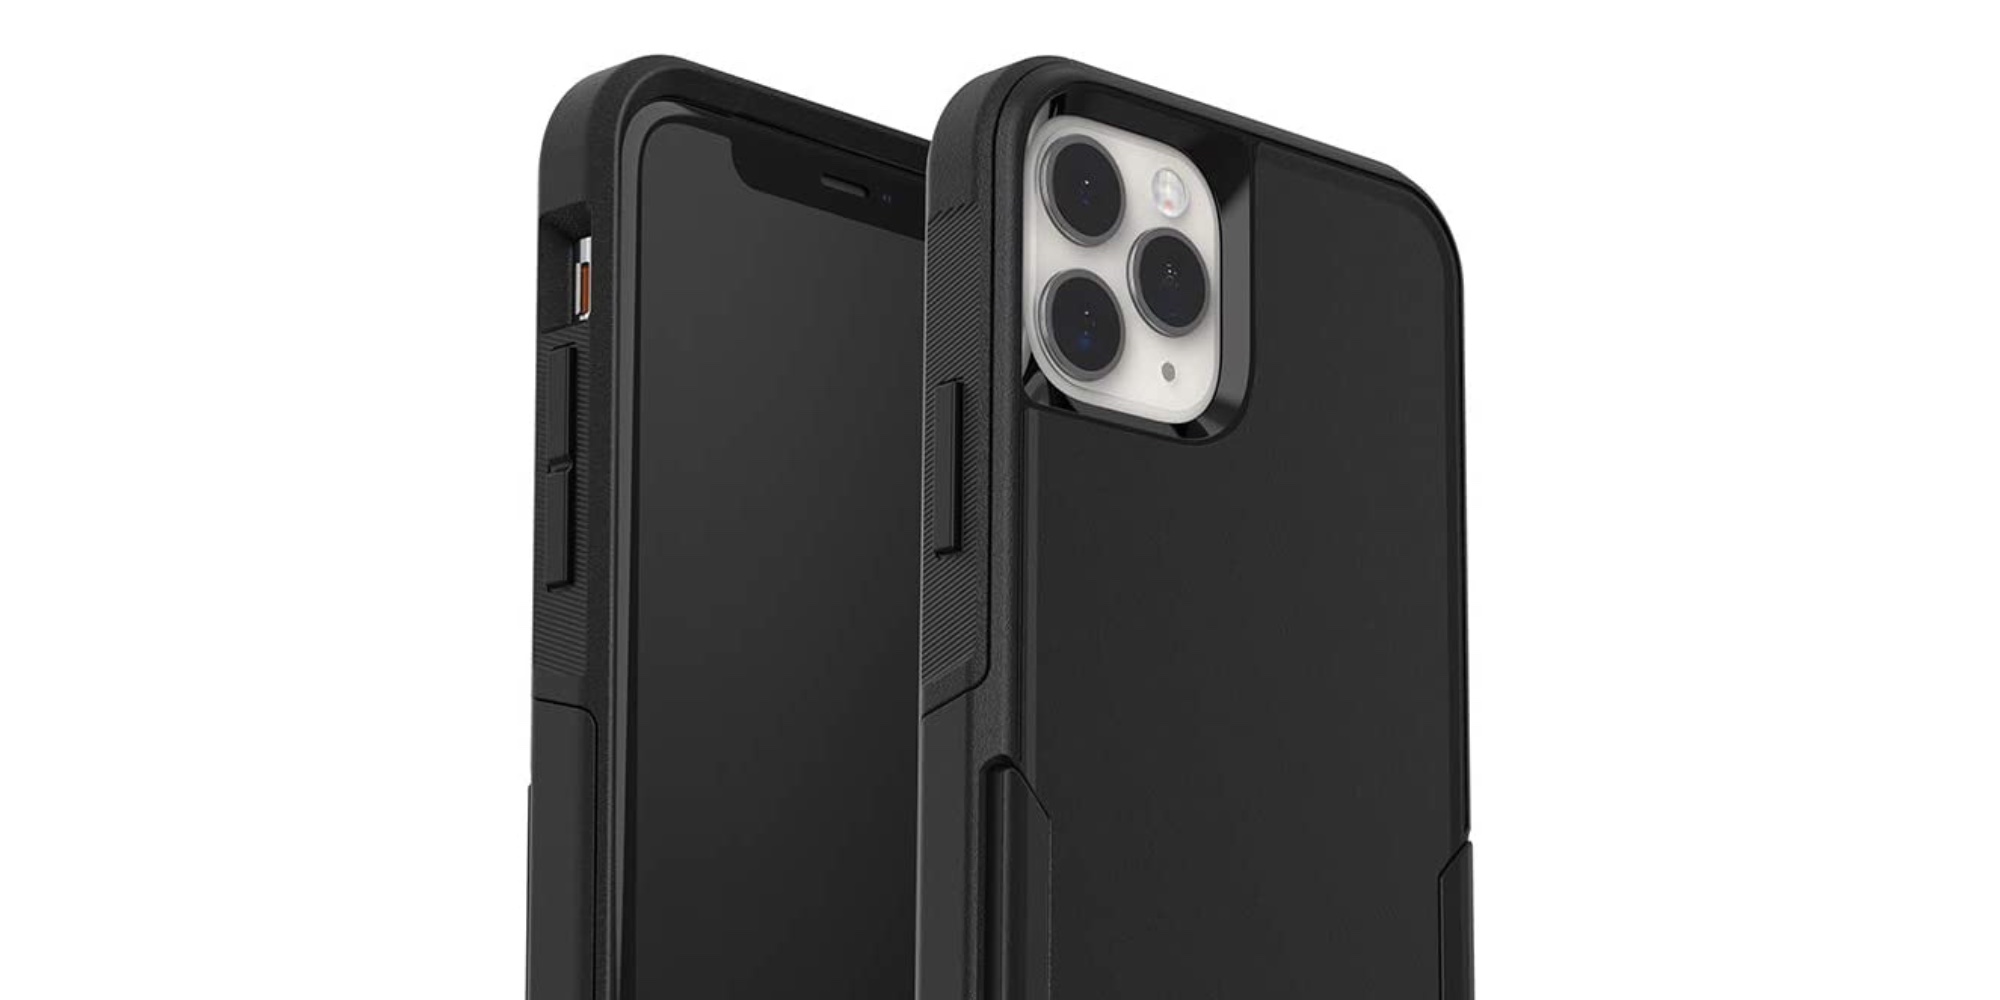 Save Up To 50 On Otterbox Iphone 12 Mini Cases At Amazon Lows From 40 9to5toys